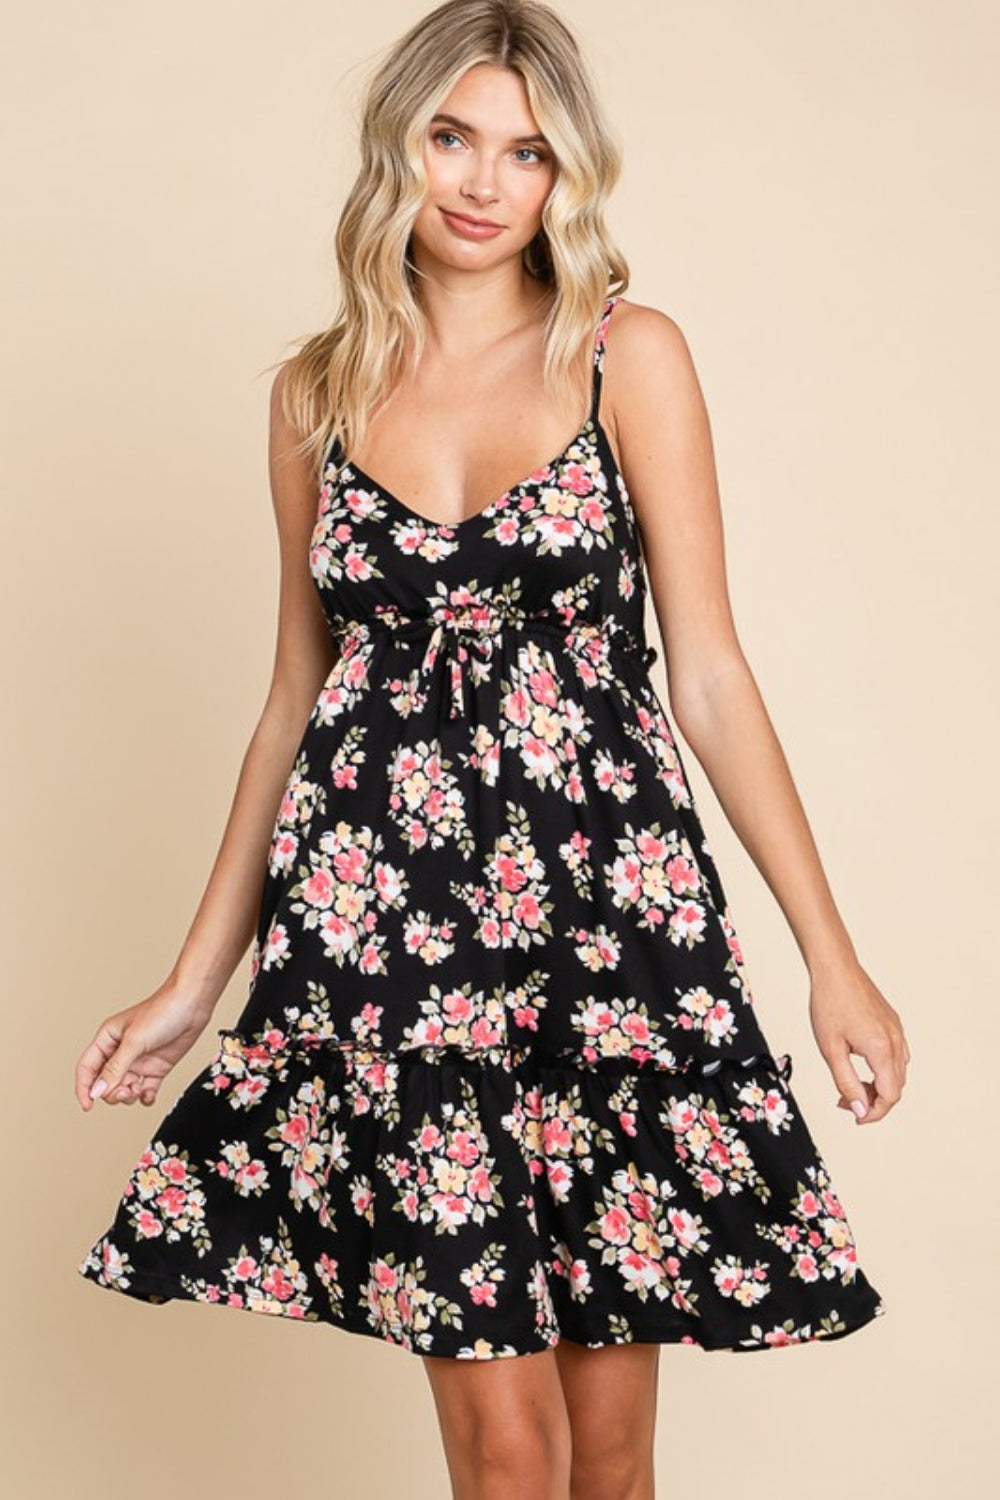 Summer Soiree Staple: Floral Frill Cami Dress - Perfect for Beach Weddings & Parties!